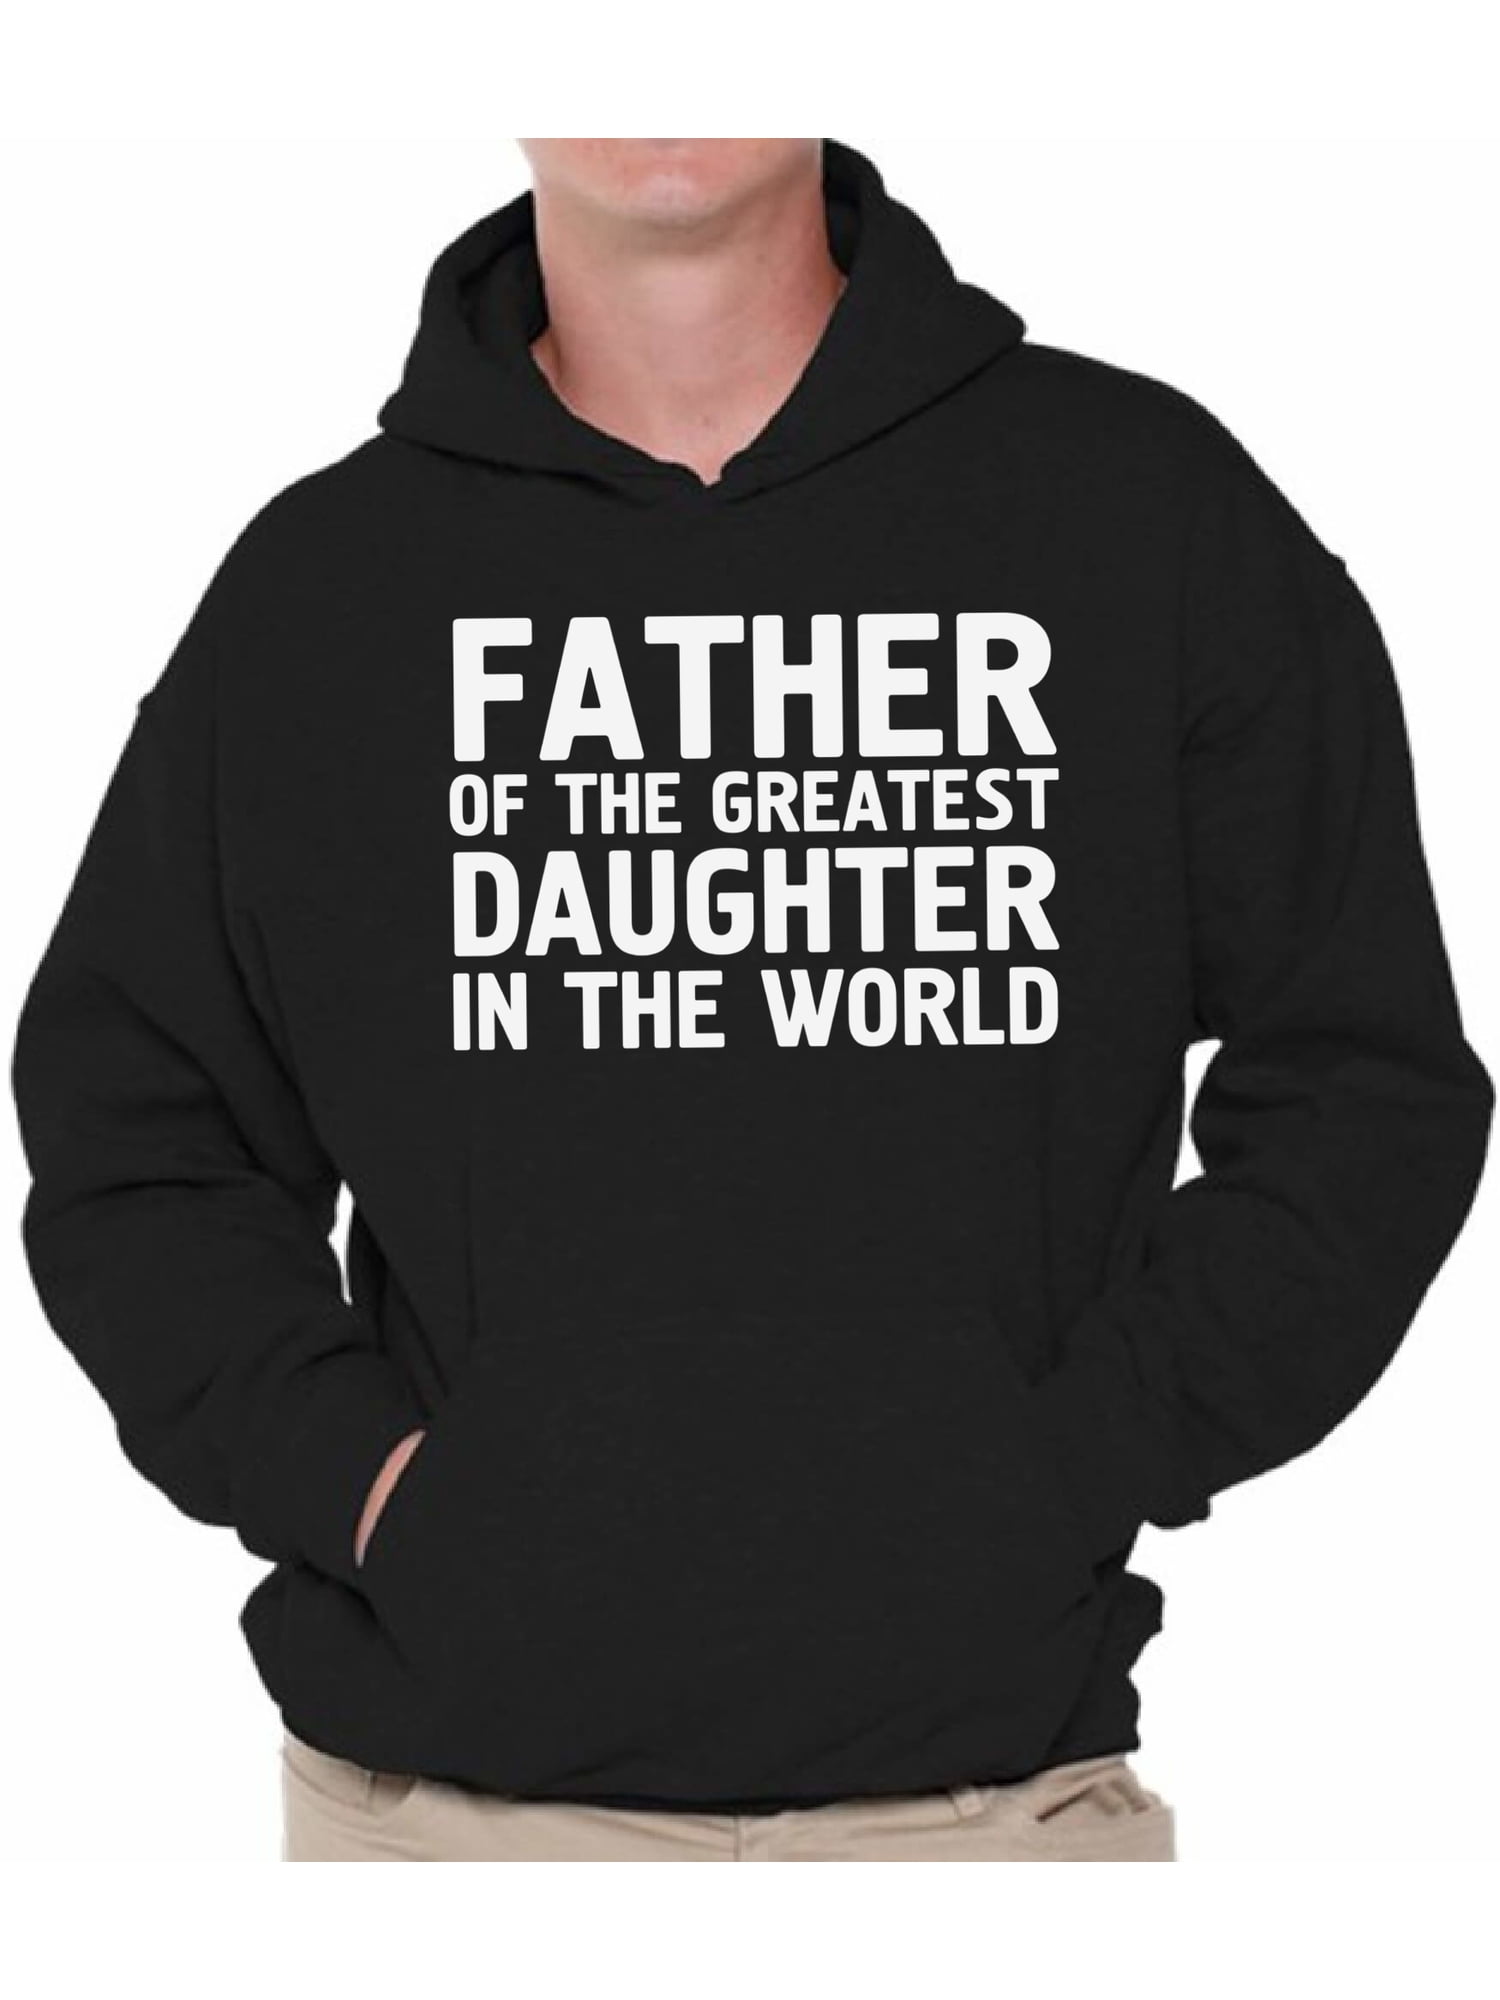 Men's I'd Rather Be On The Xbox Hoodie Black Hoody Jumper Top Present Father Bir 